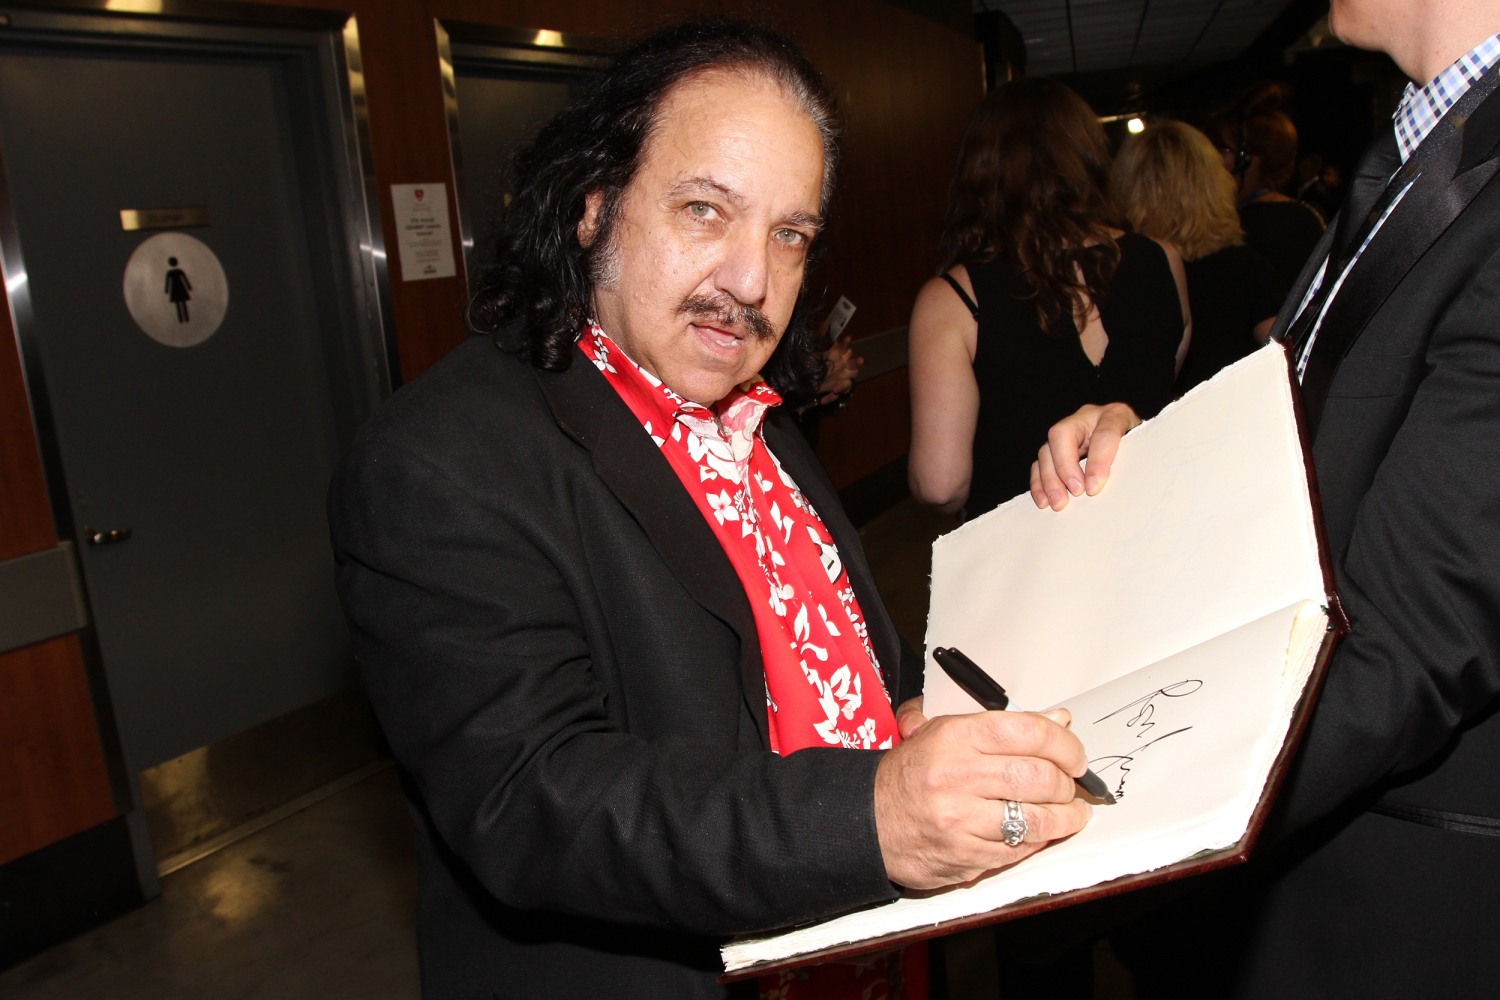 Xxx V Rep - Porn actor Ron Jeremy charged with rape, sexual assault